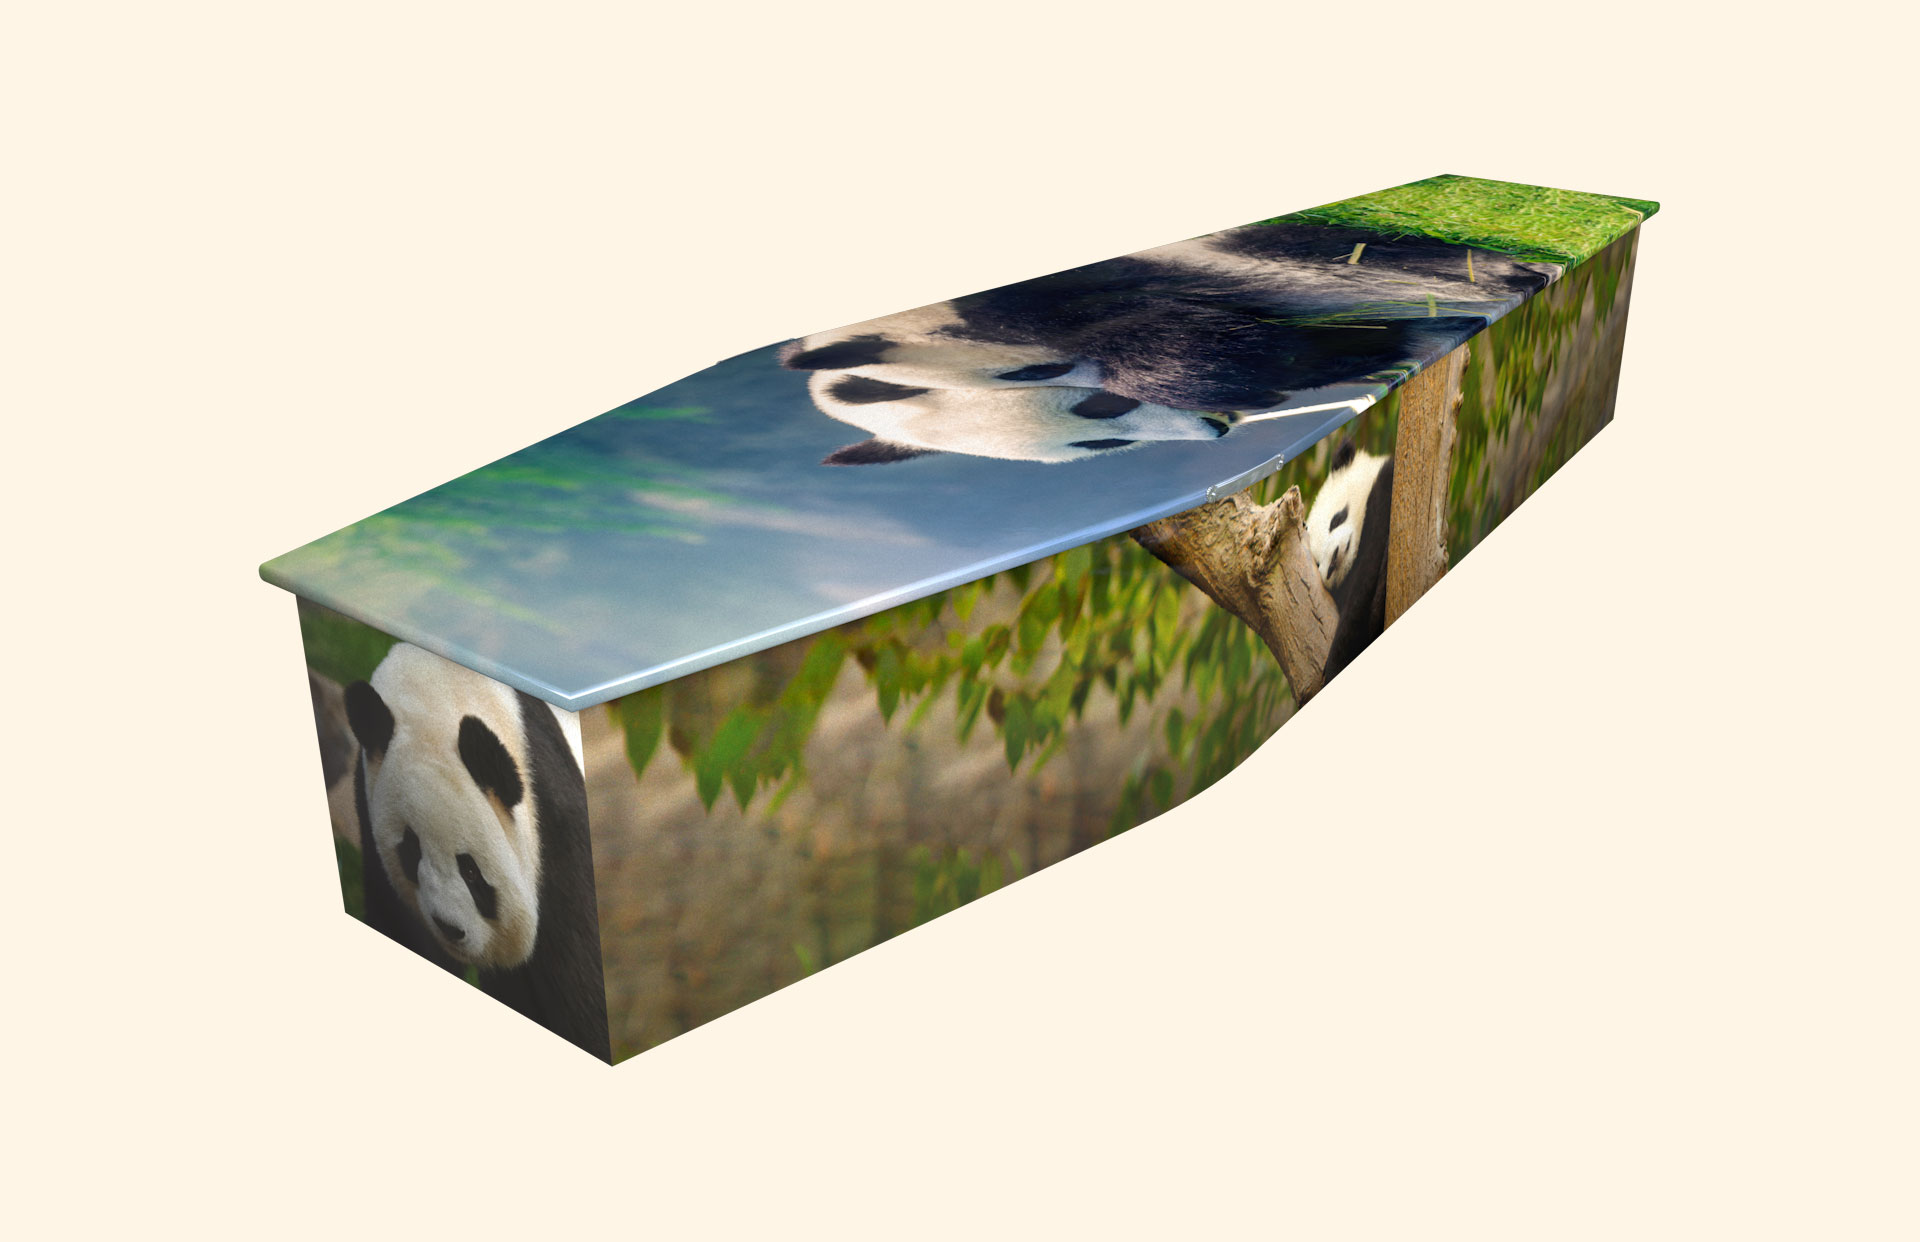 Panda Love design on a traditional coffin